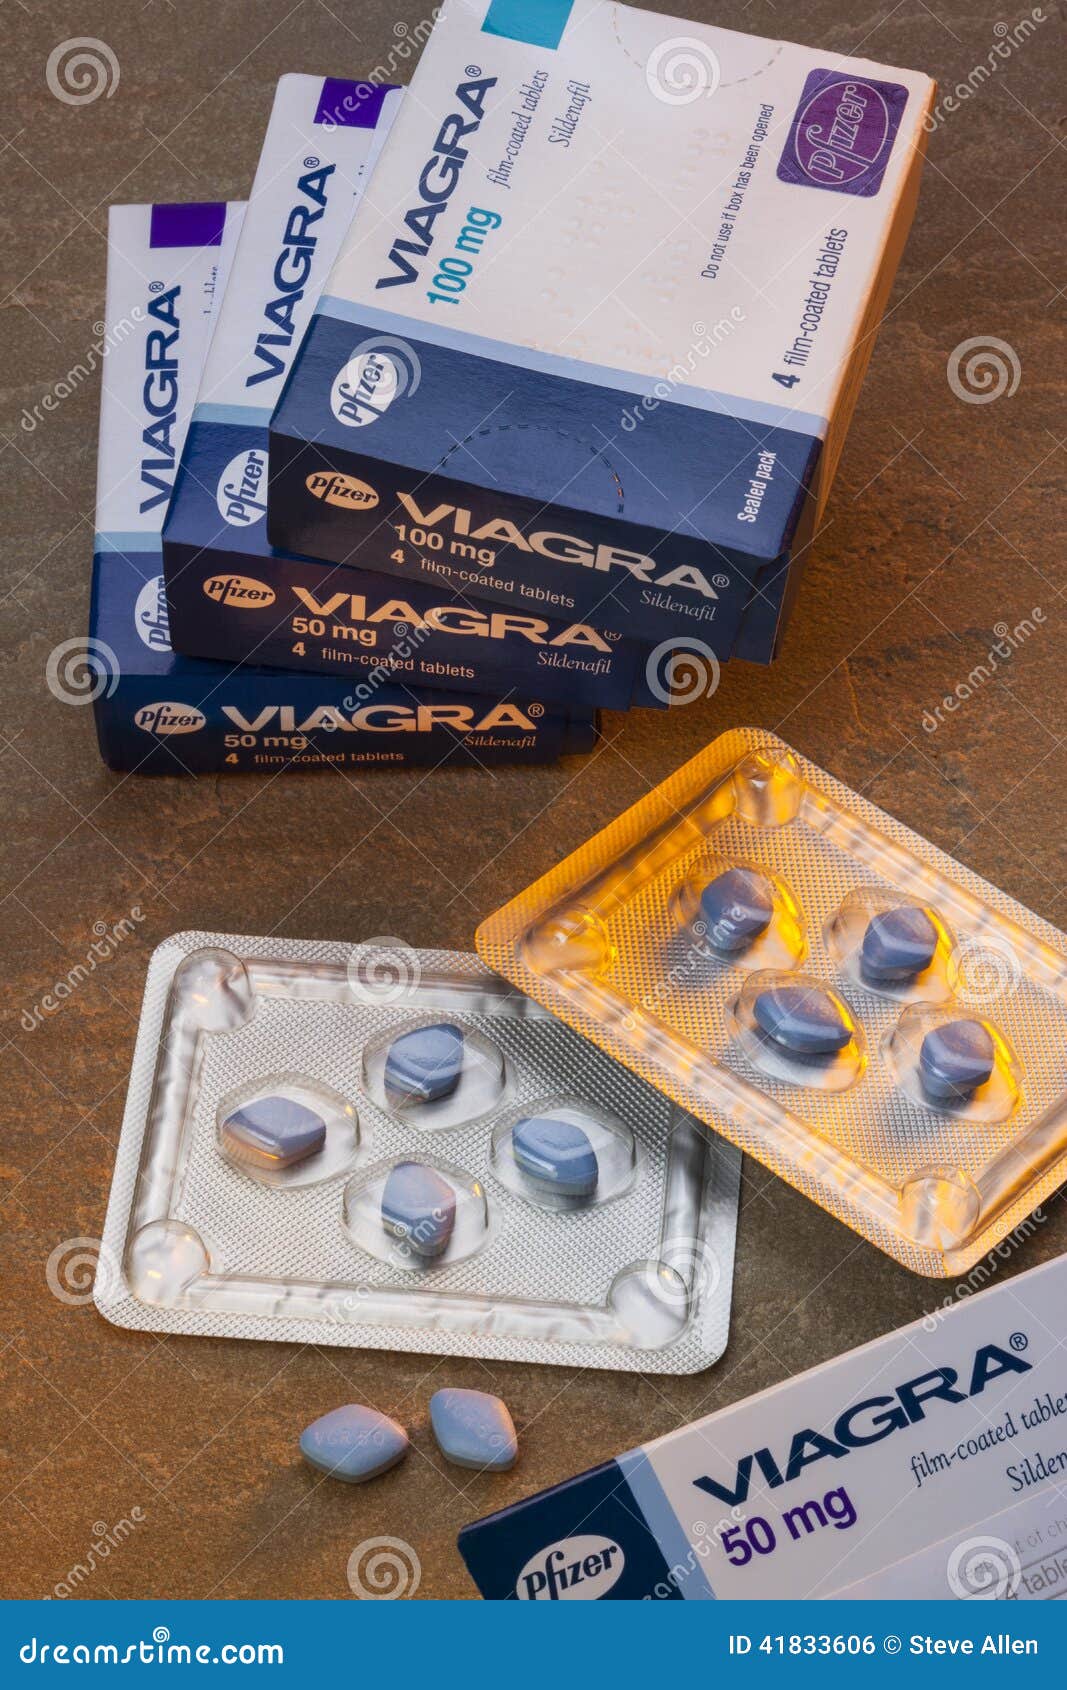 treatment of erectile dysfunction. Sildenafil citrate, sold as Viagra ...